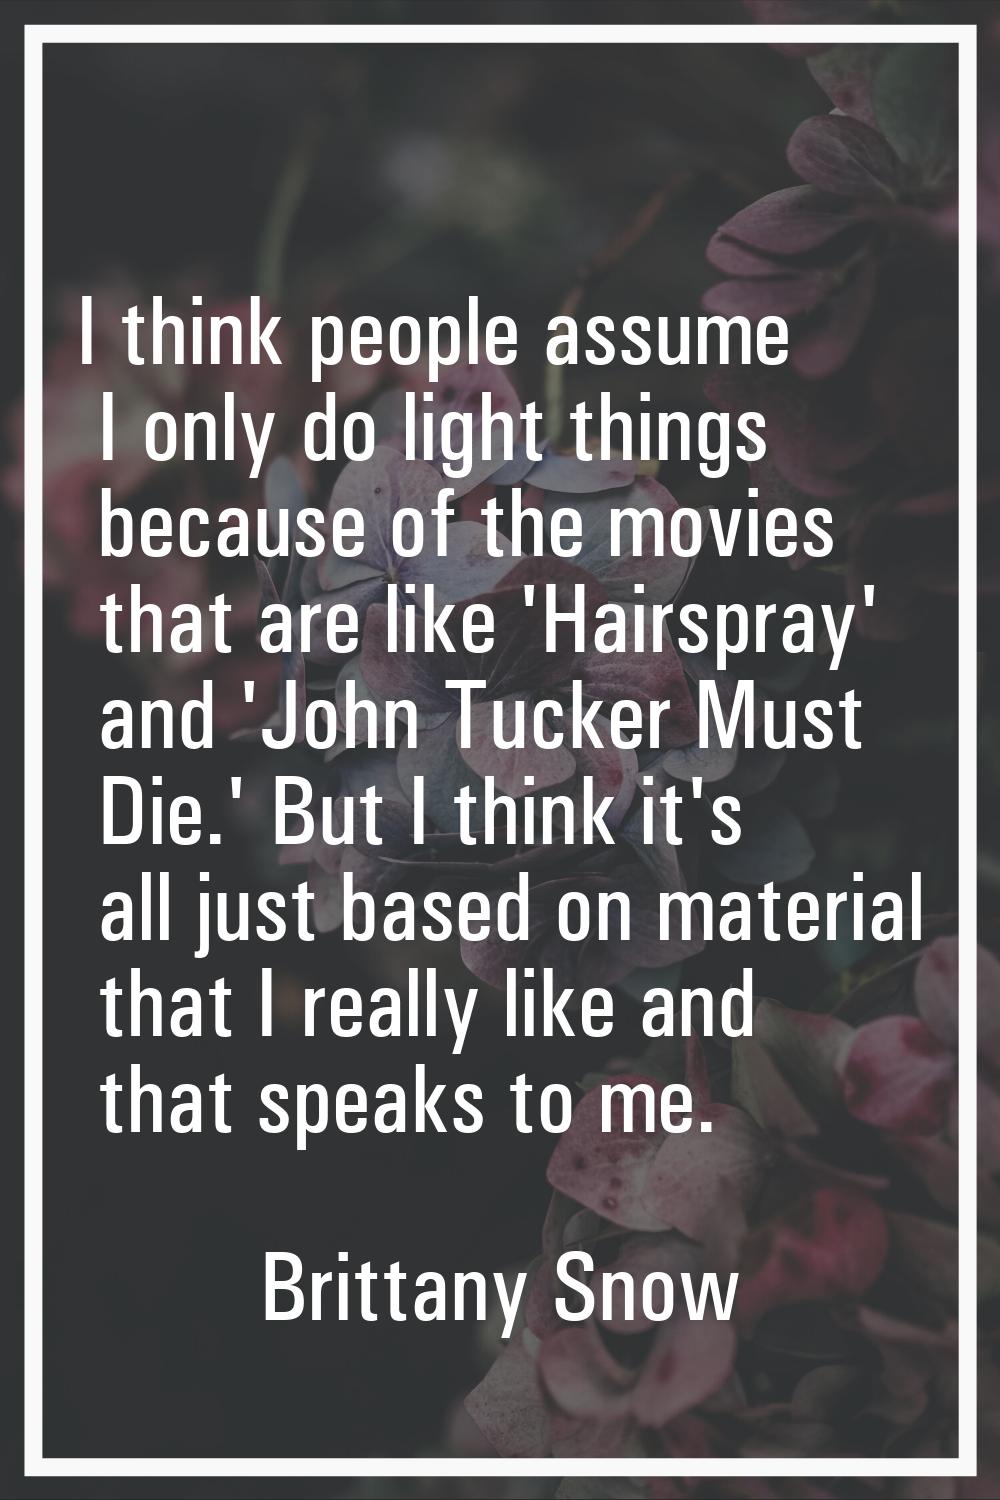 I think people assume I only do light things because of the movies that are like 'Hairspray' and 'J